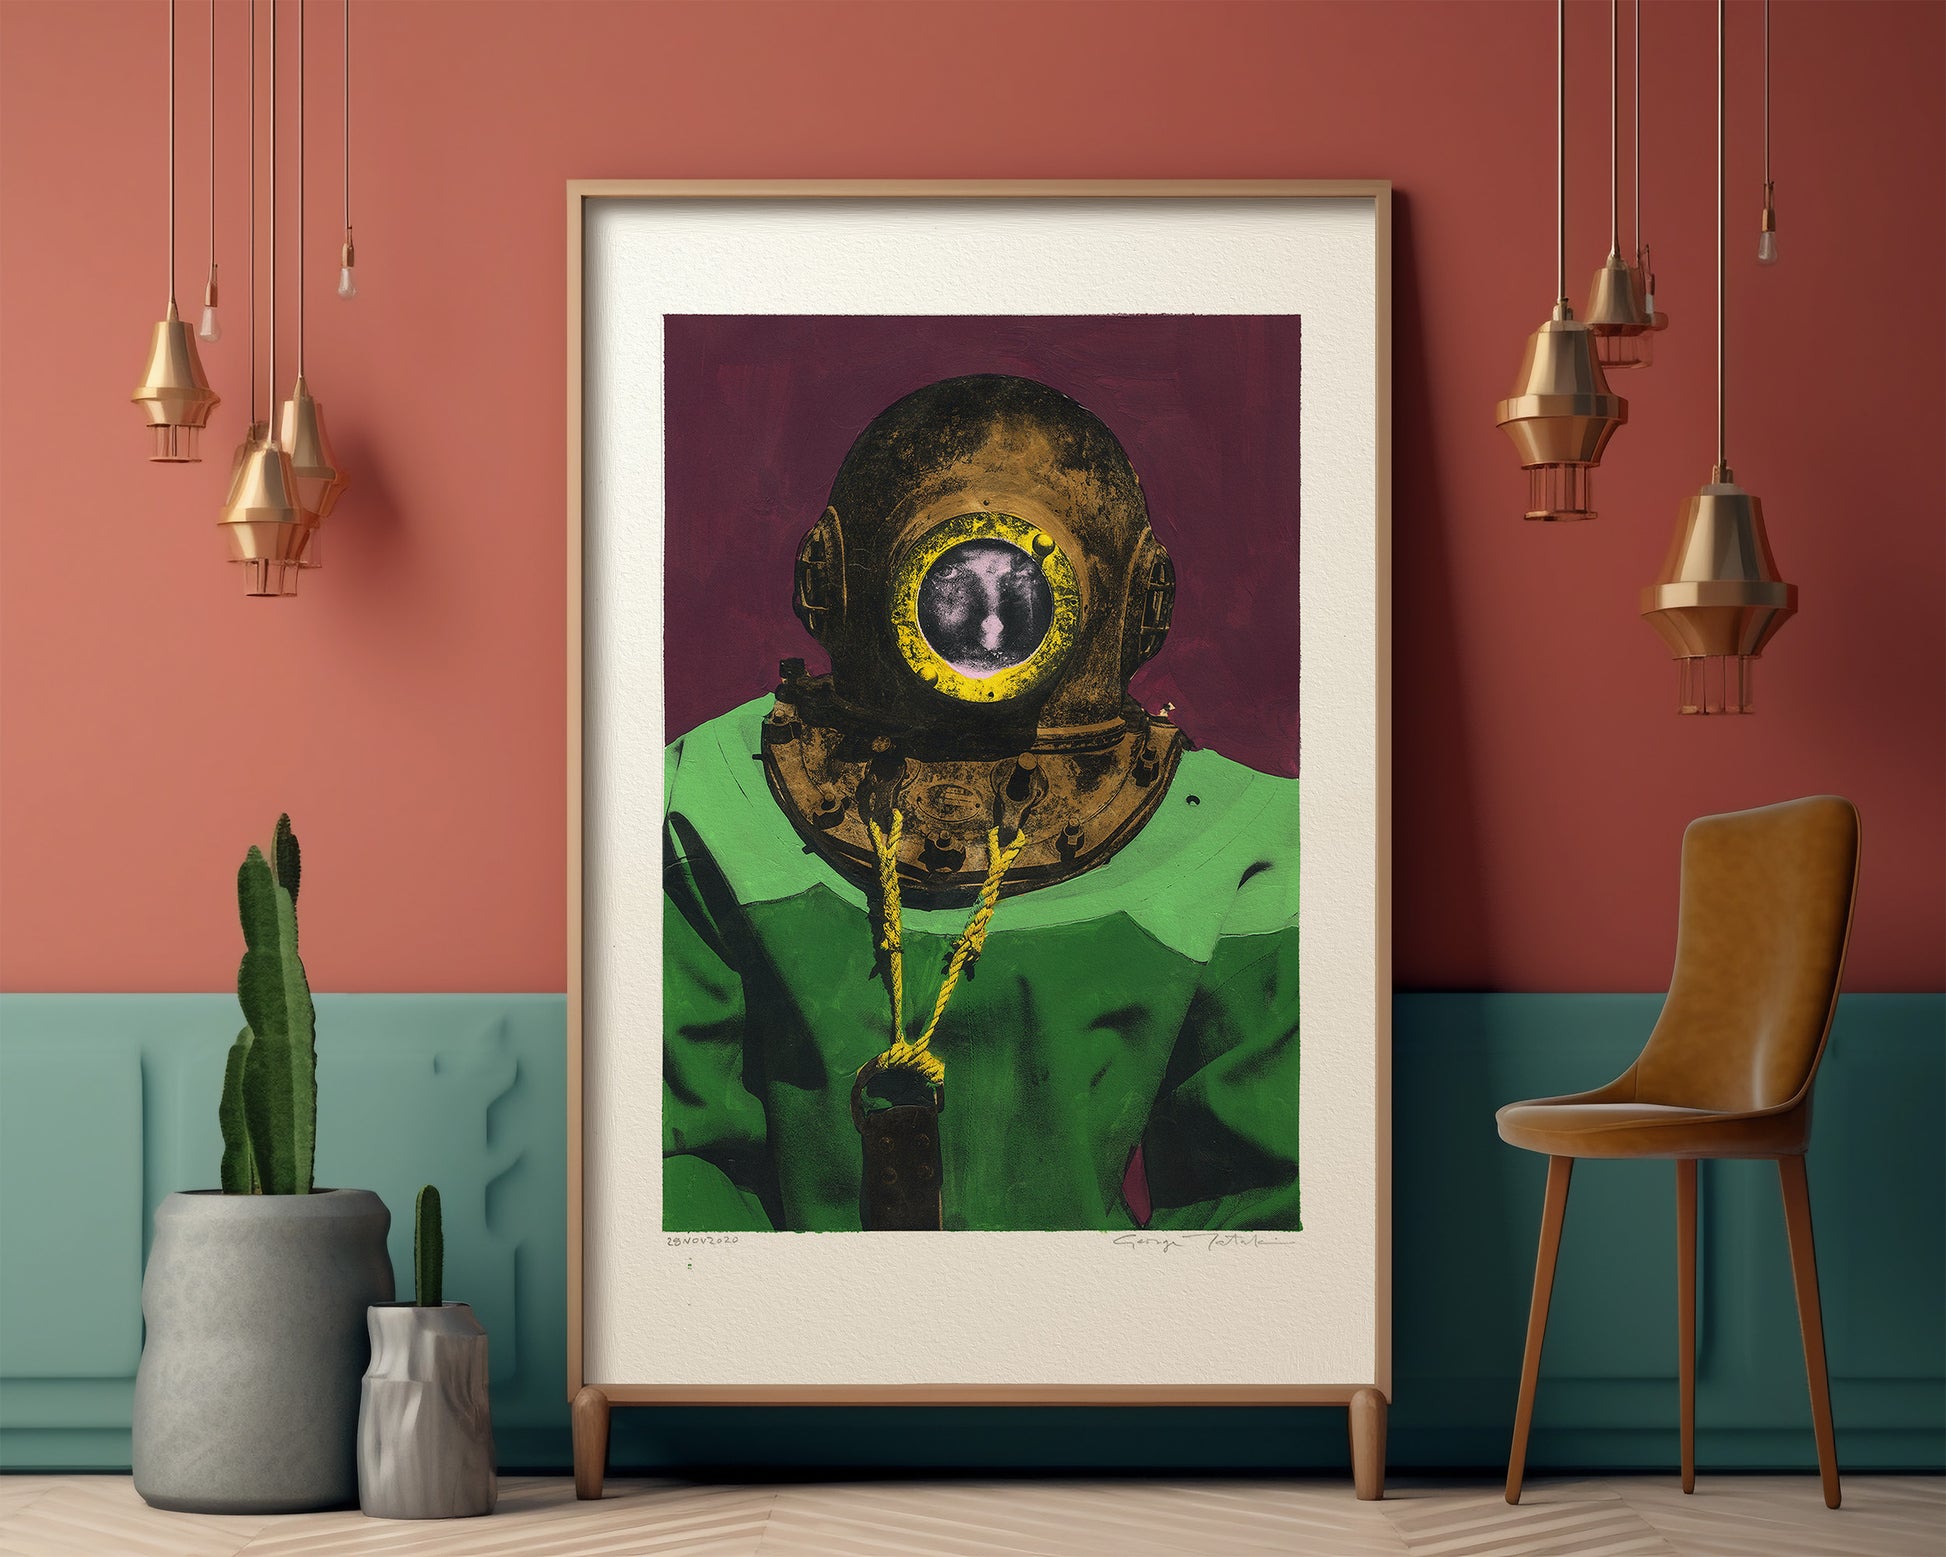 Painting Pop Art Wall Art from Greece | Purple sponge diver from Kalymnos island, by George Tatakis - inside an eclectic room